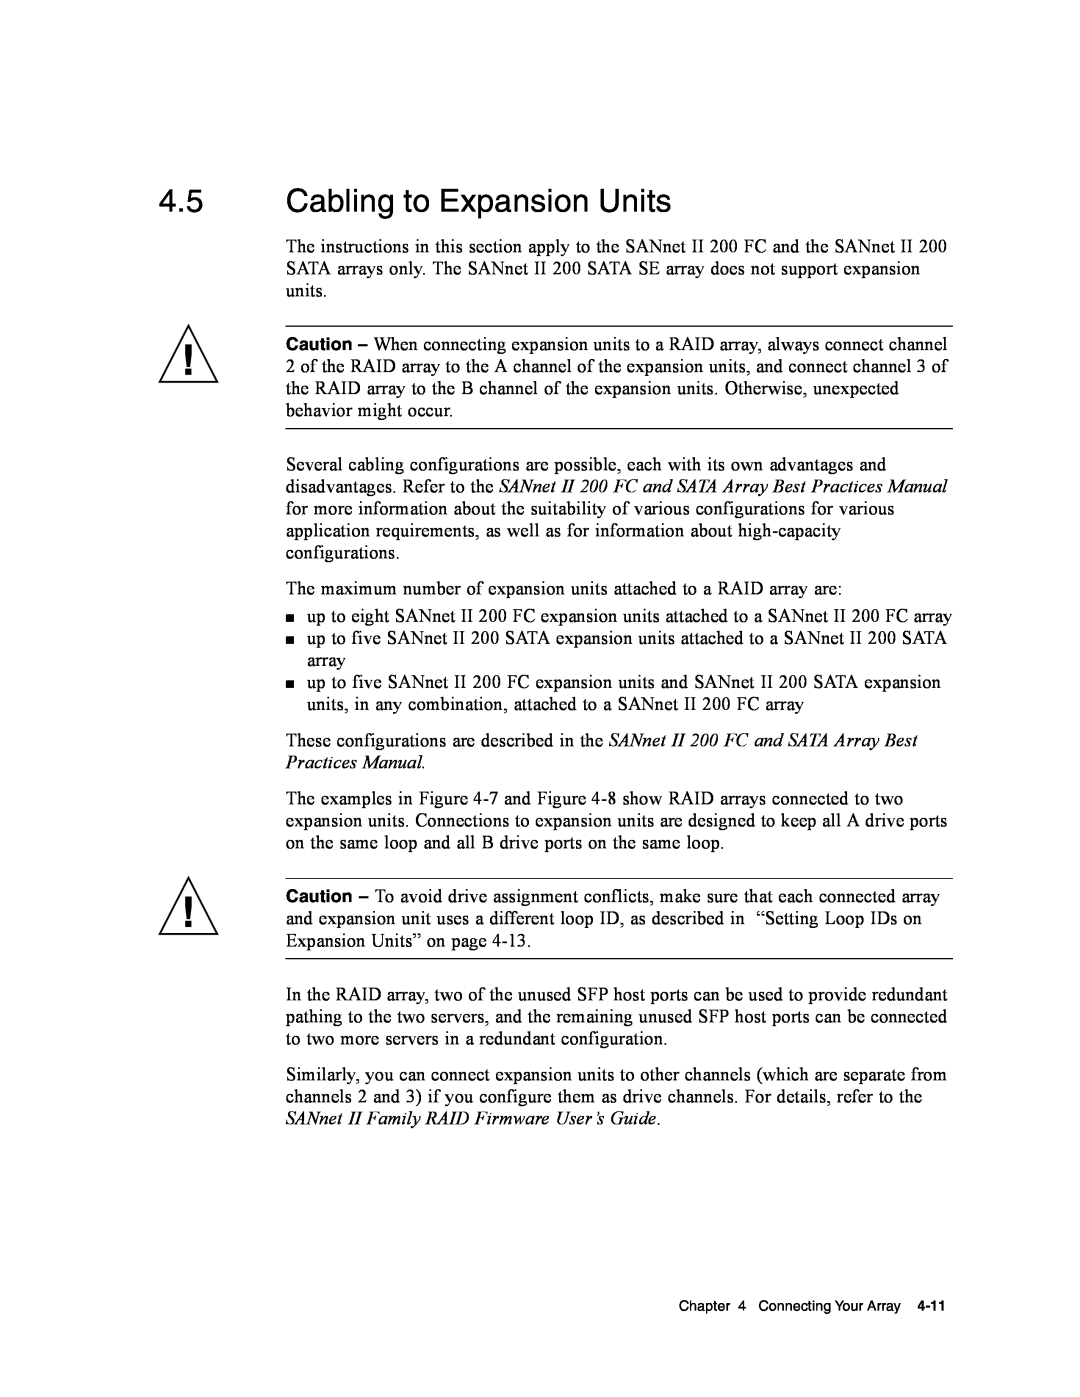 Dot Hill Systems II 200 FC service manual Cabling to Expansion Units 